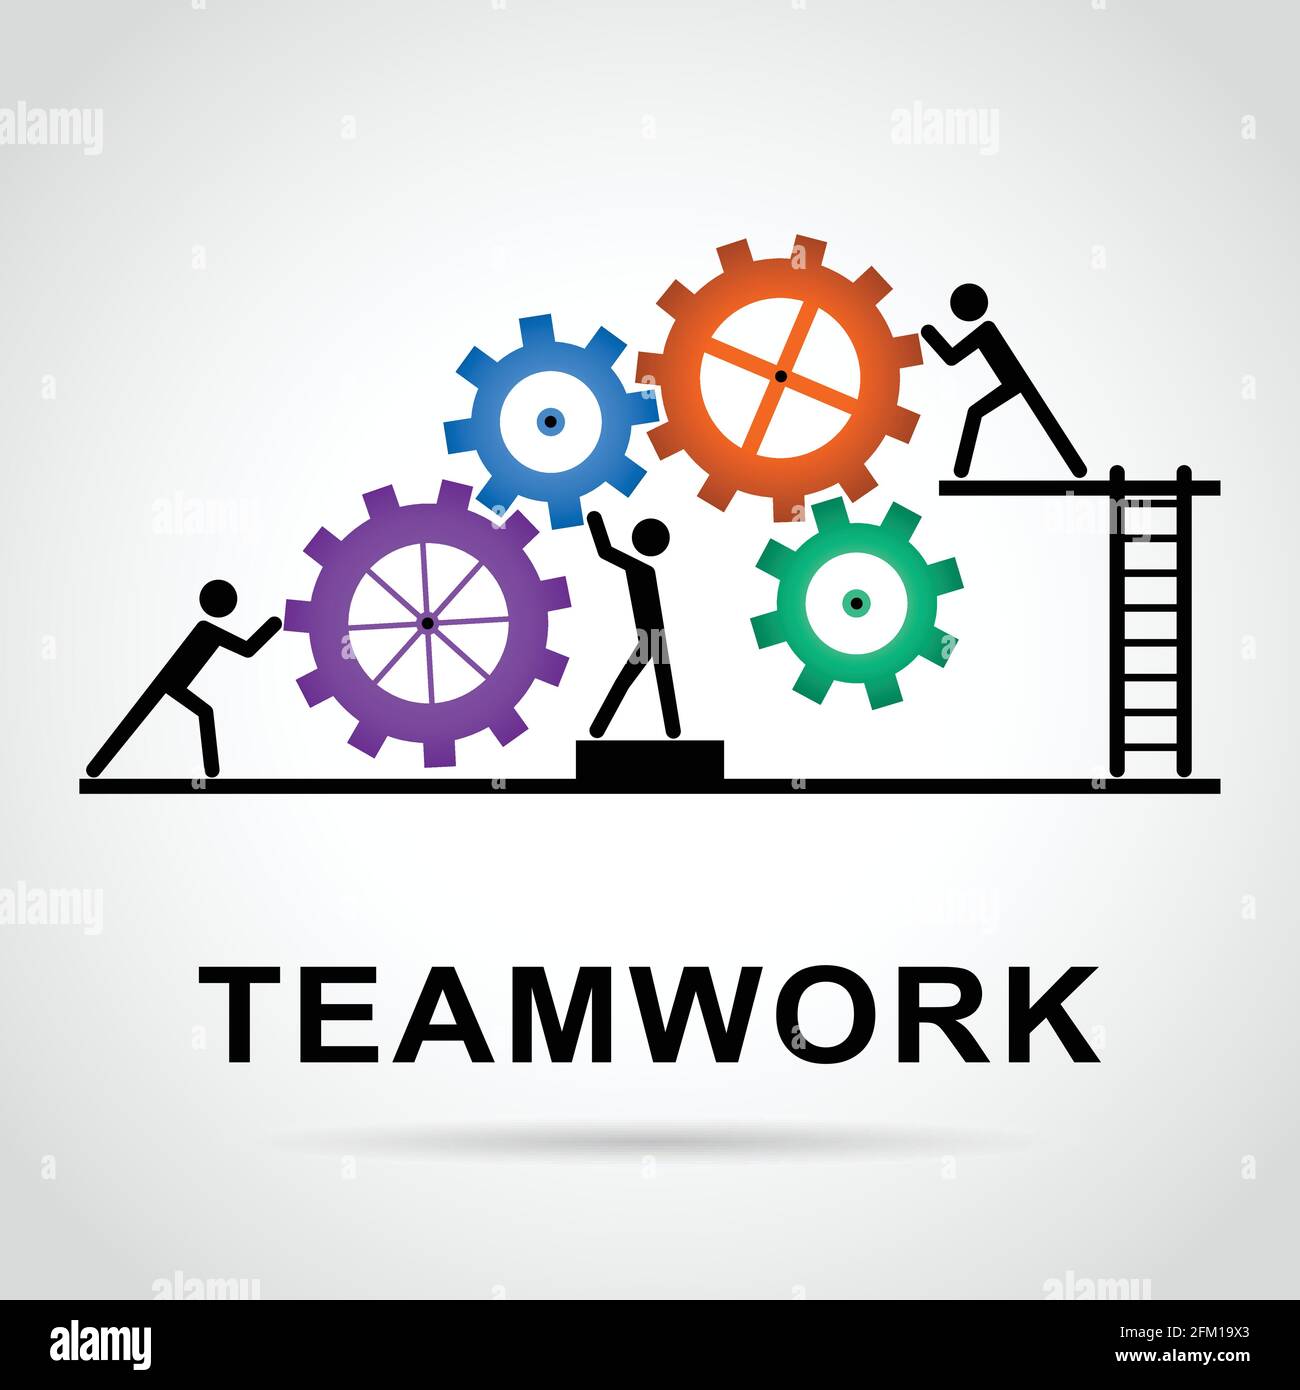 Illustration of teamwork design with colorful wheels Stock Vector